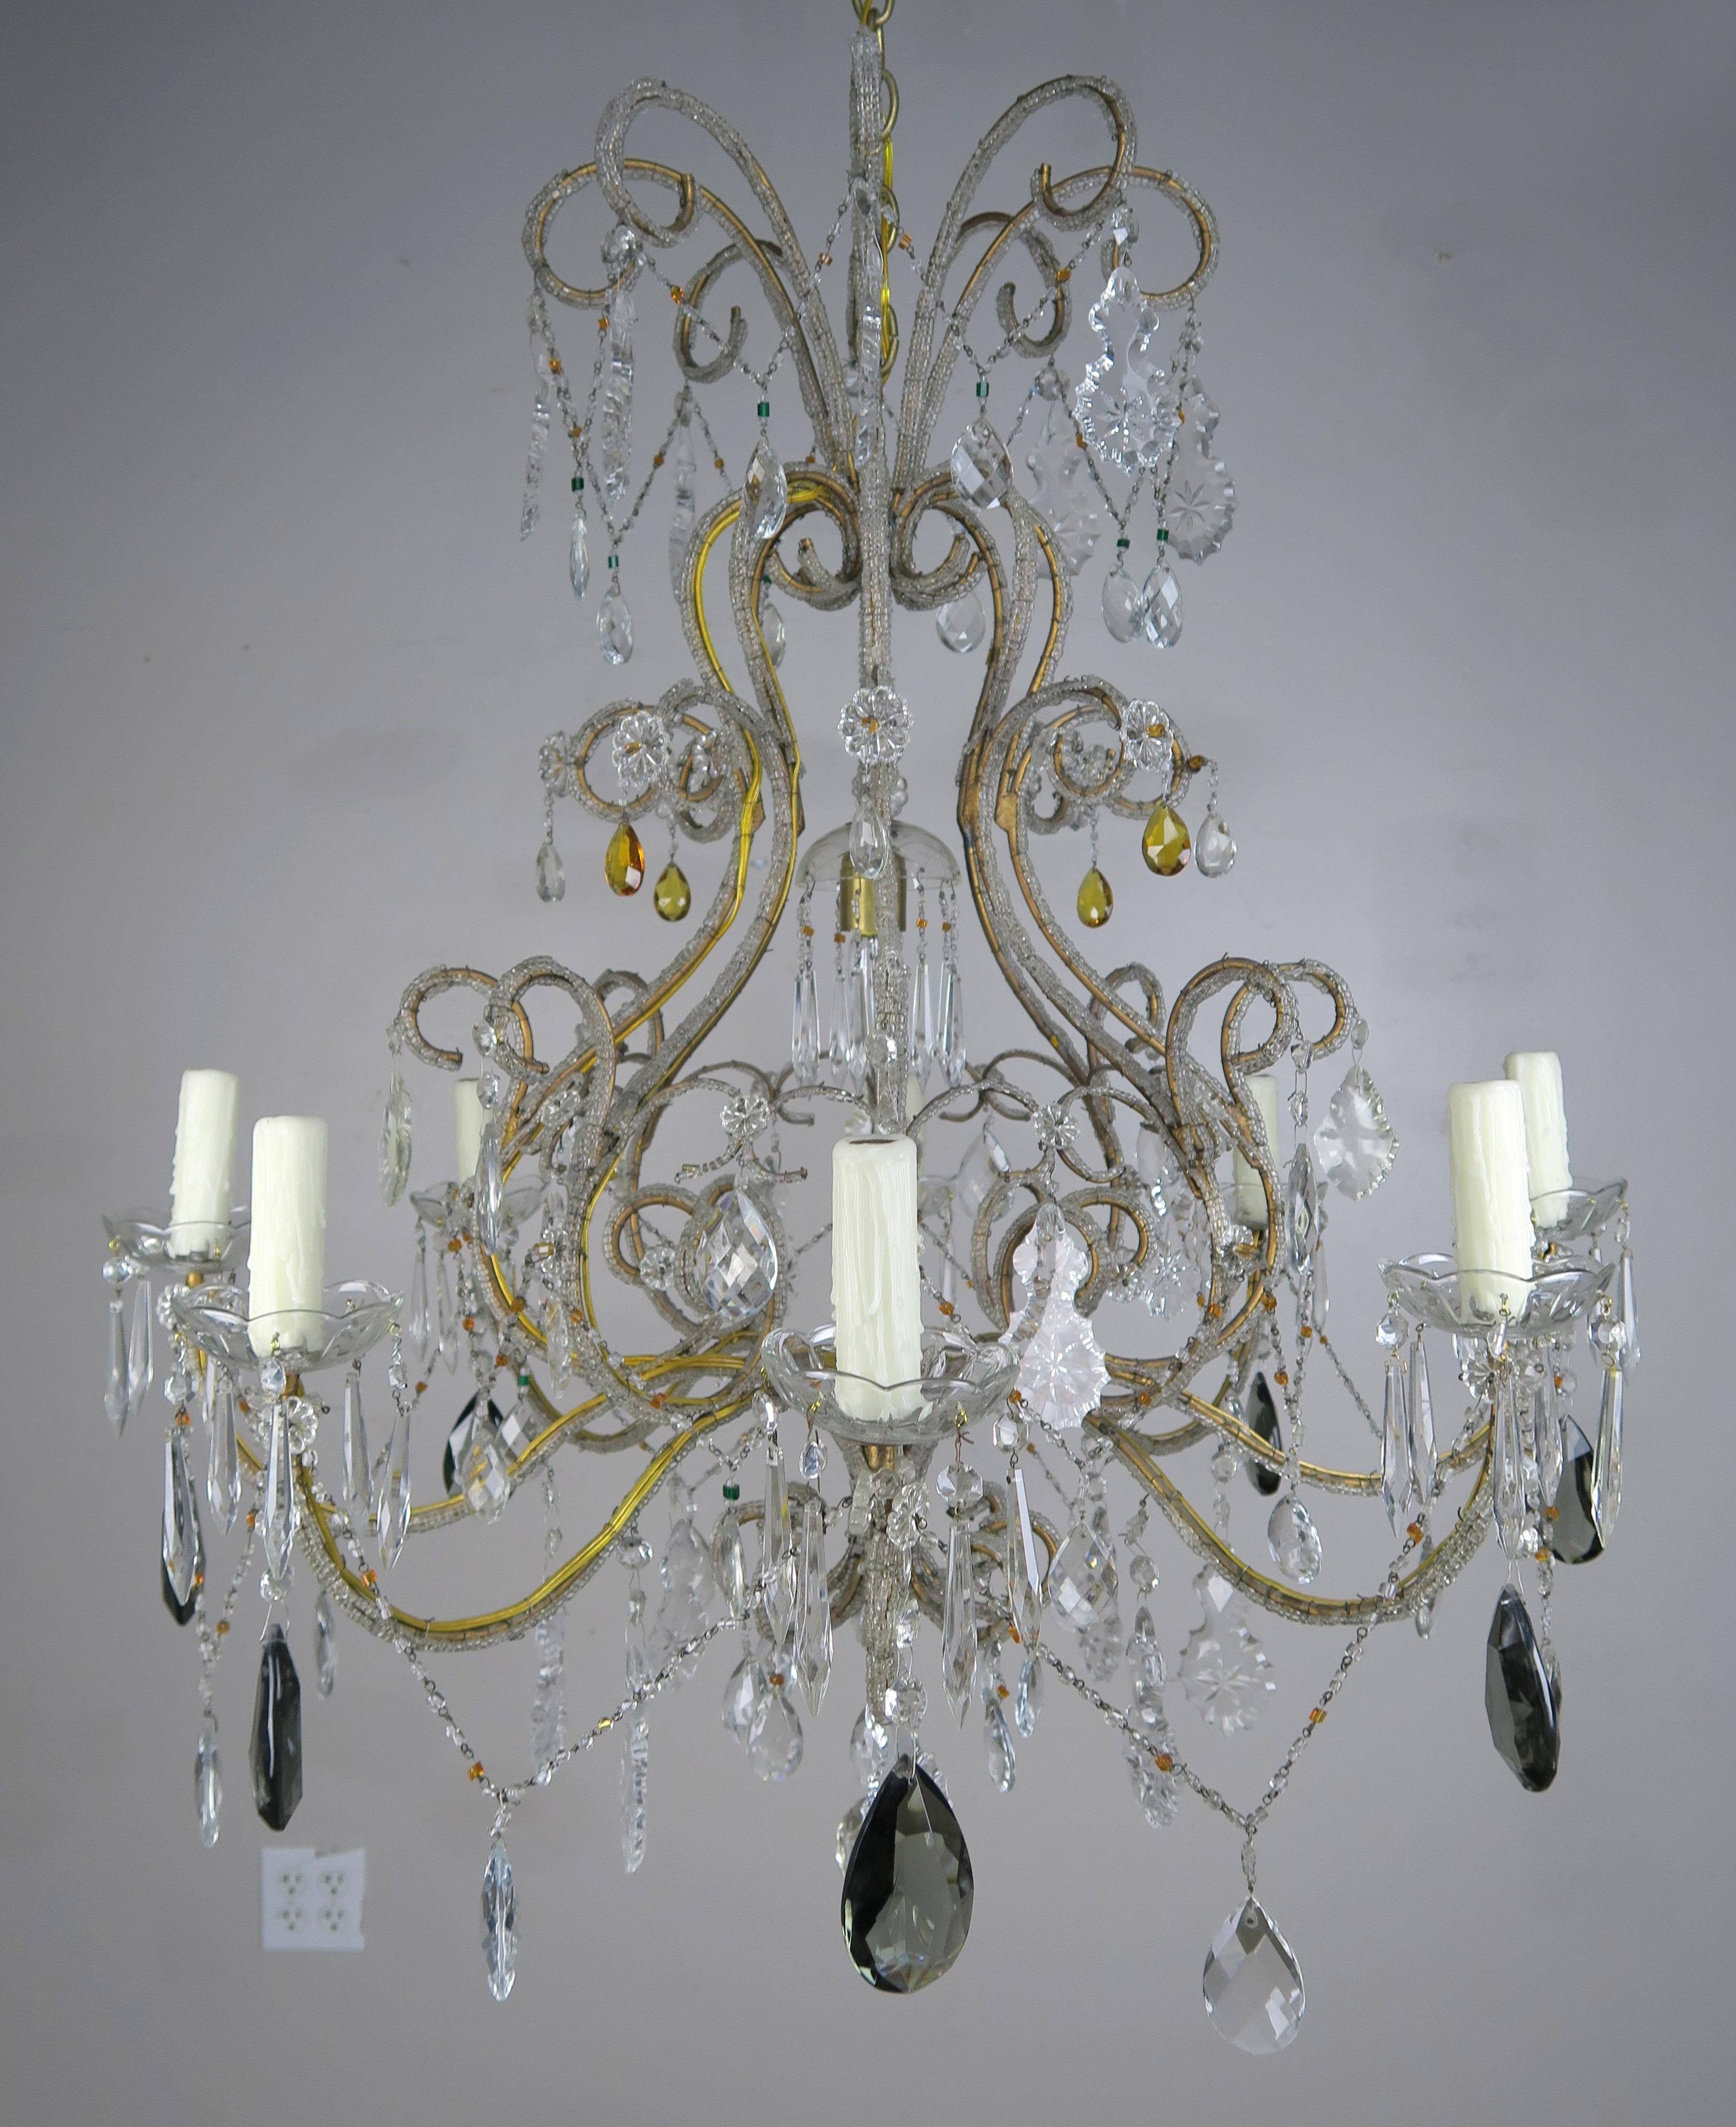 Eight Light Italian Crystal Beaded Chandelier with Smokey Drops For Sale 6